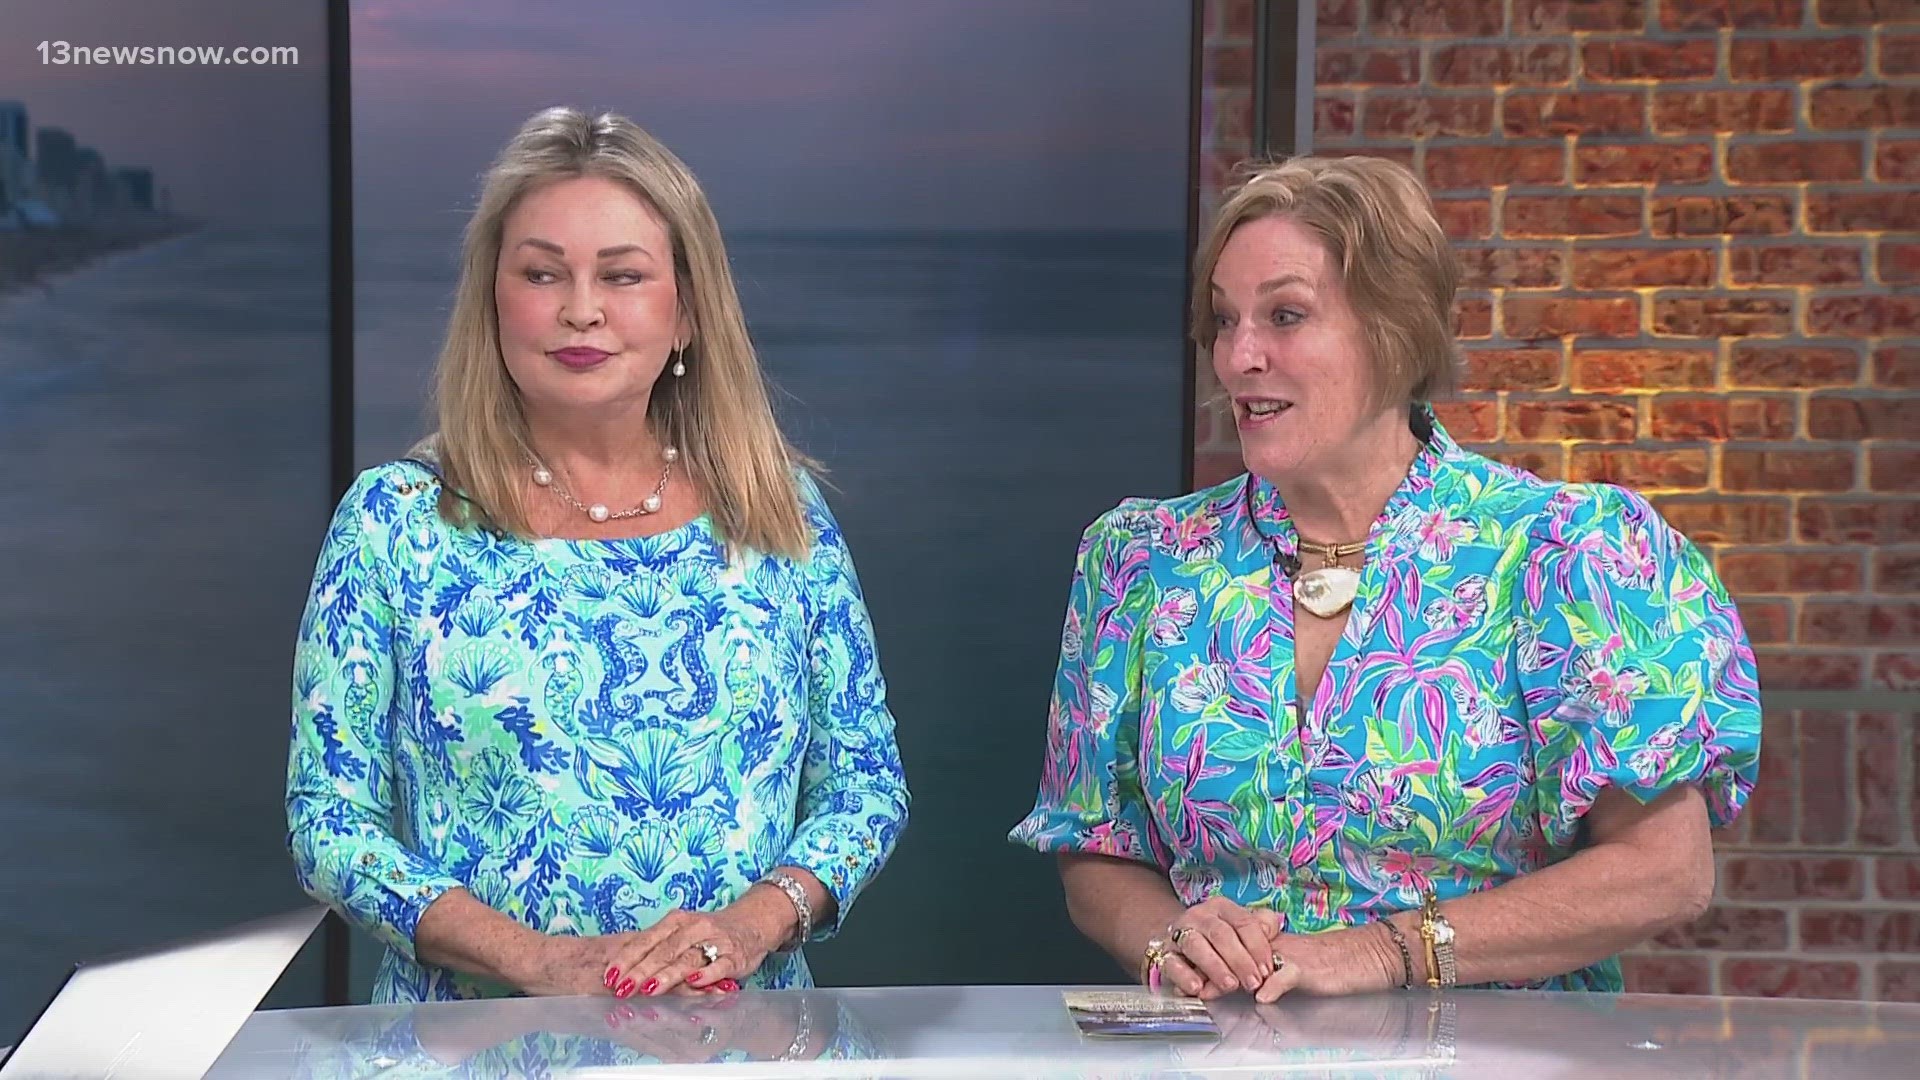 Katie Hand and Judy Aspinwal from the Garden Club of Virginia join us to talk about the garden tour in Virginia Beach's North End neighborhood this month.